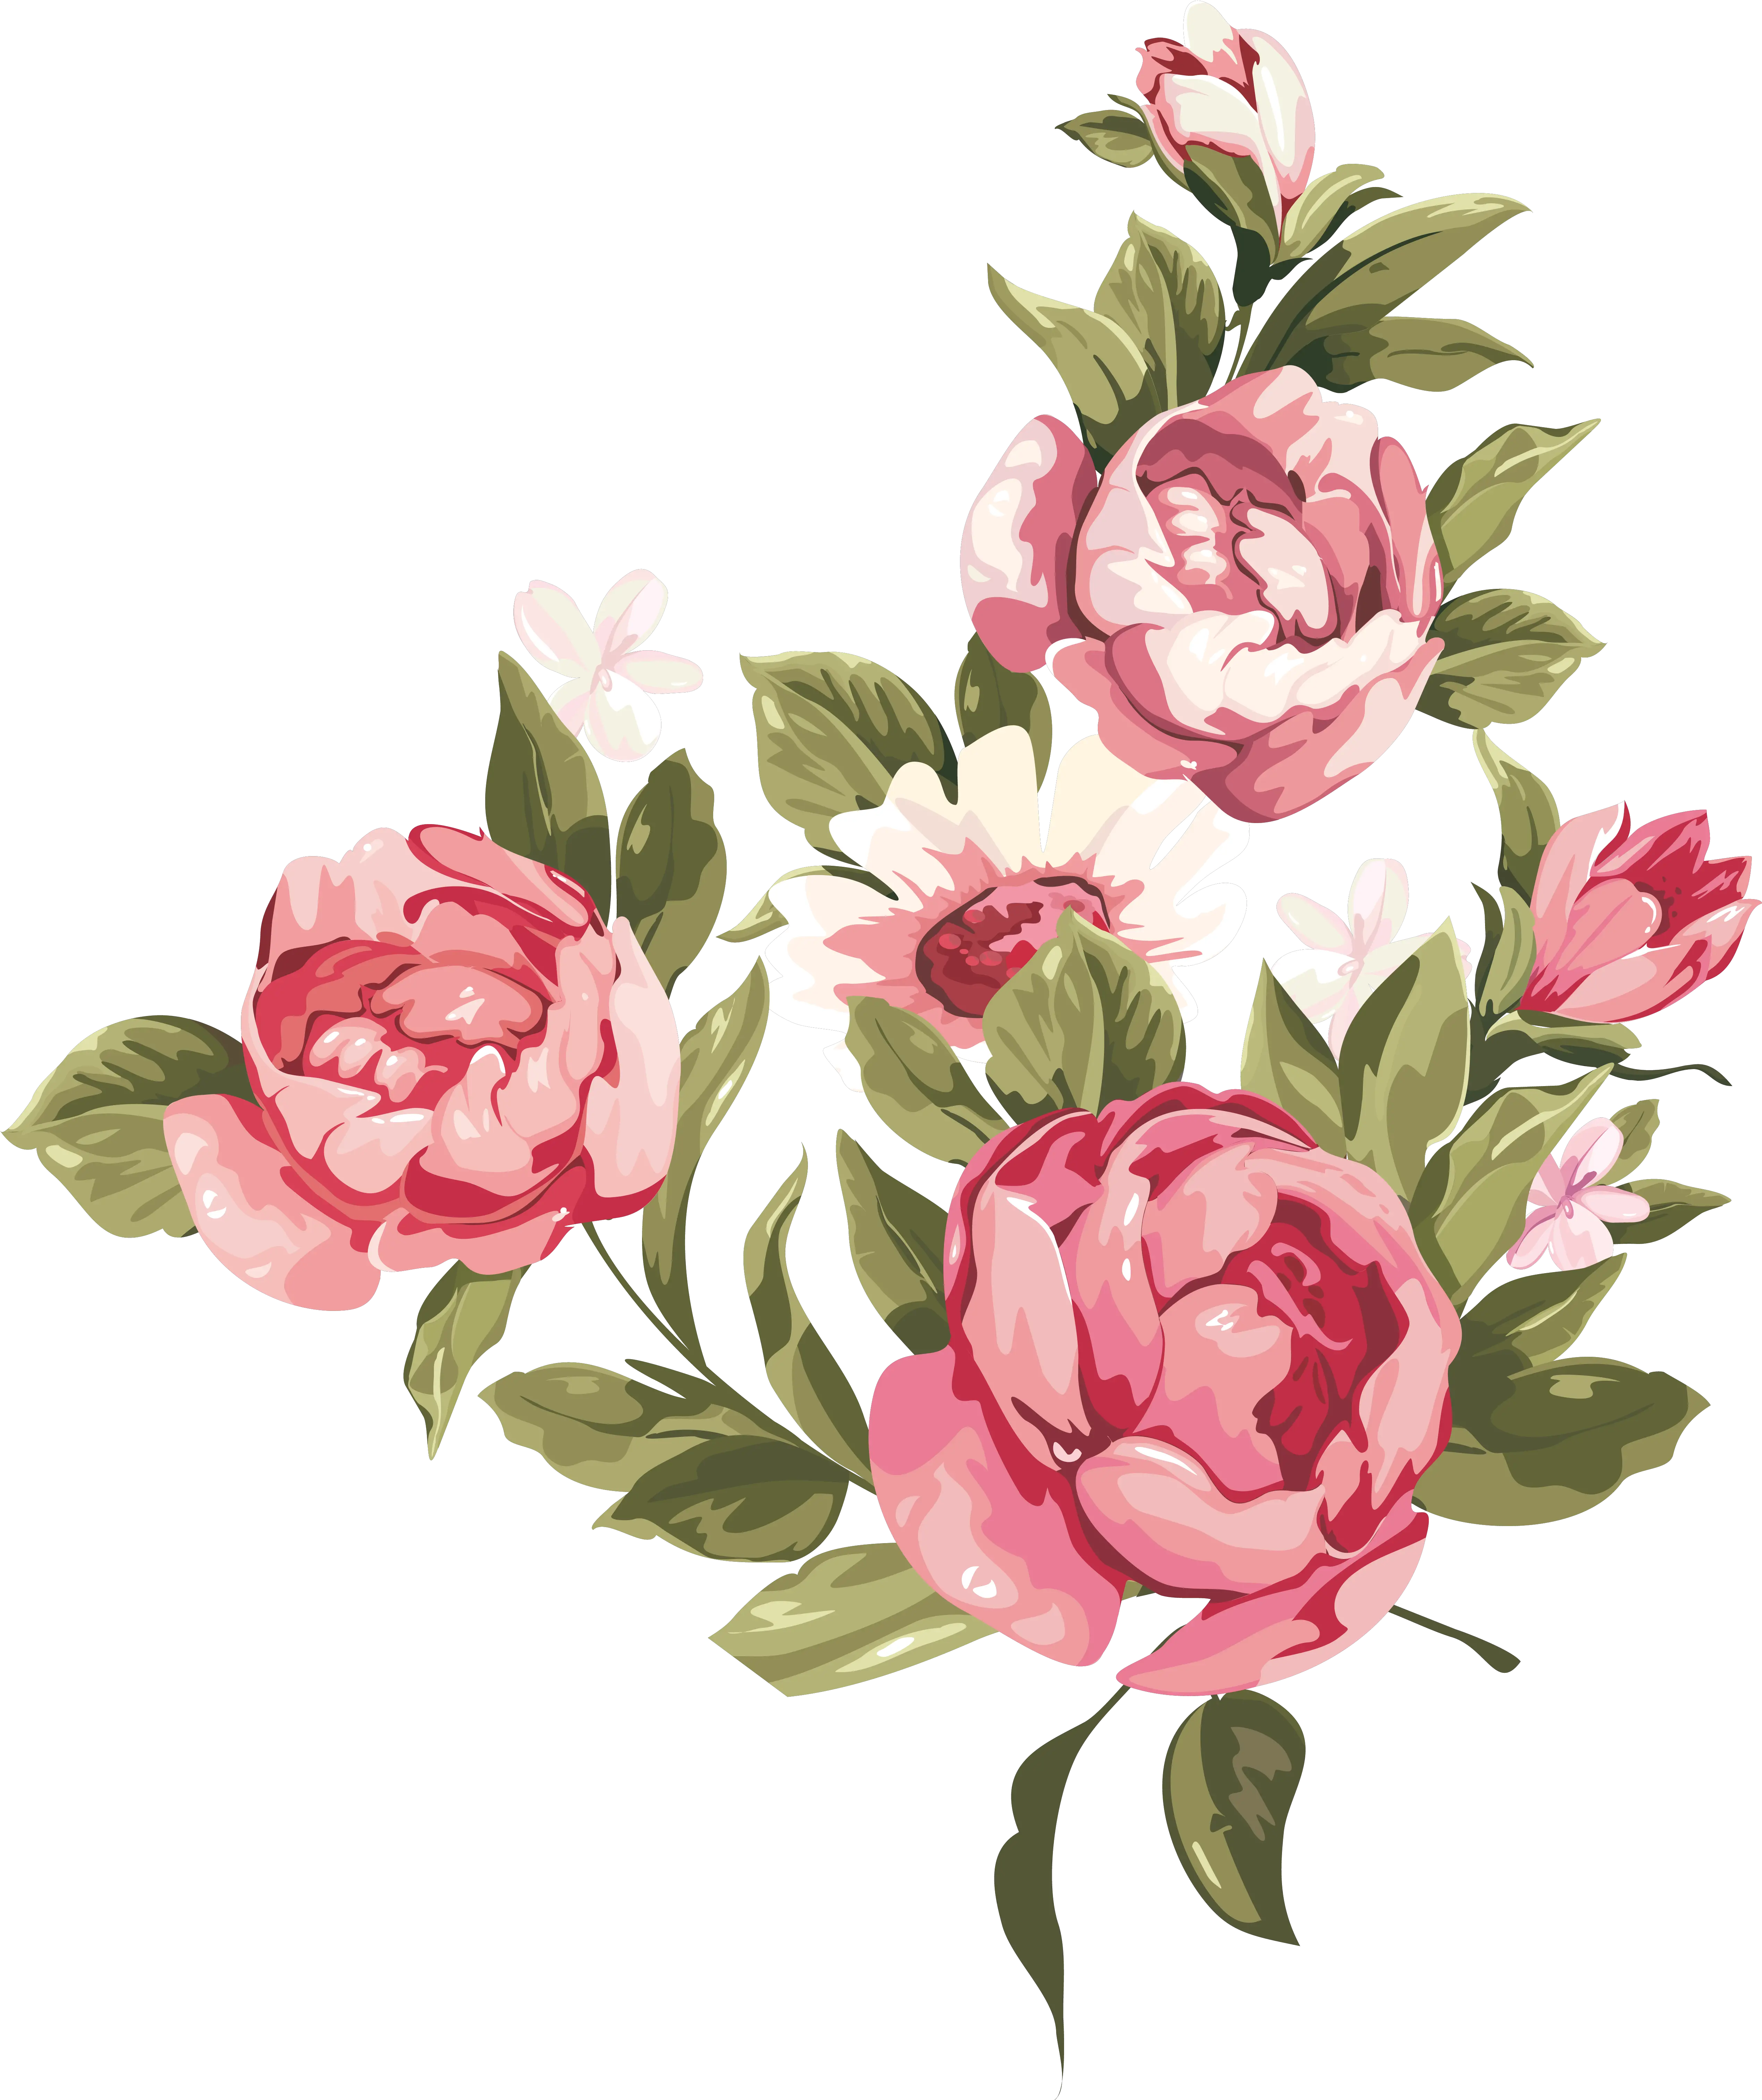 Download Hd Roses Clipart Border Transparent Png Image All Types Of Mothers On Day Roses Border Png